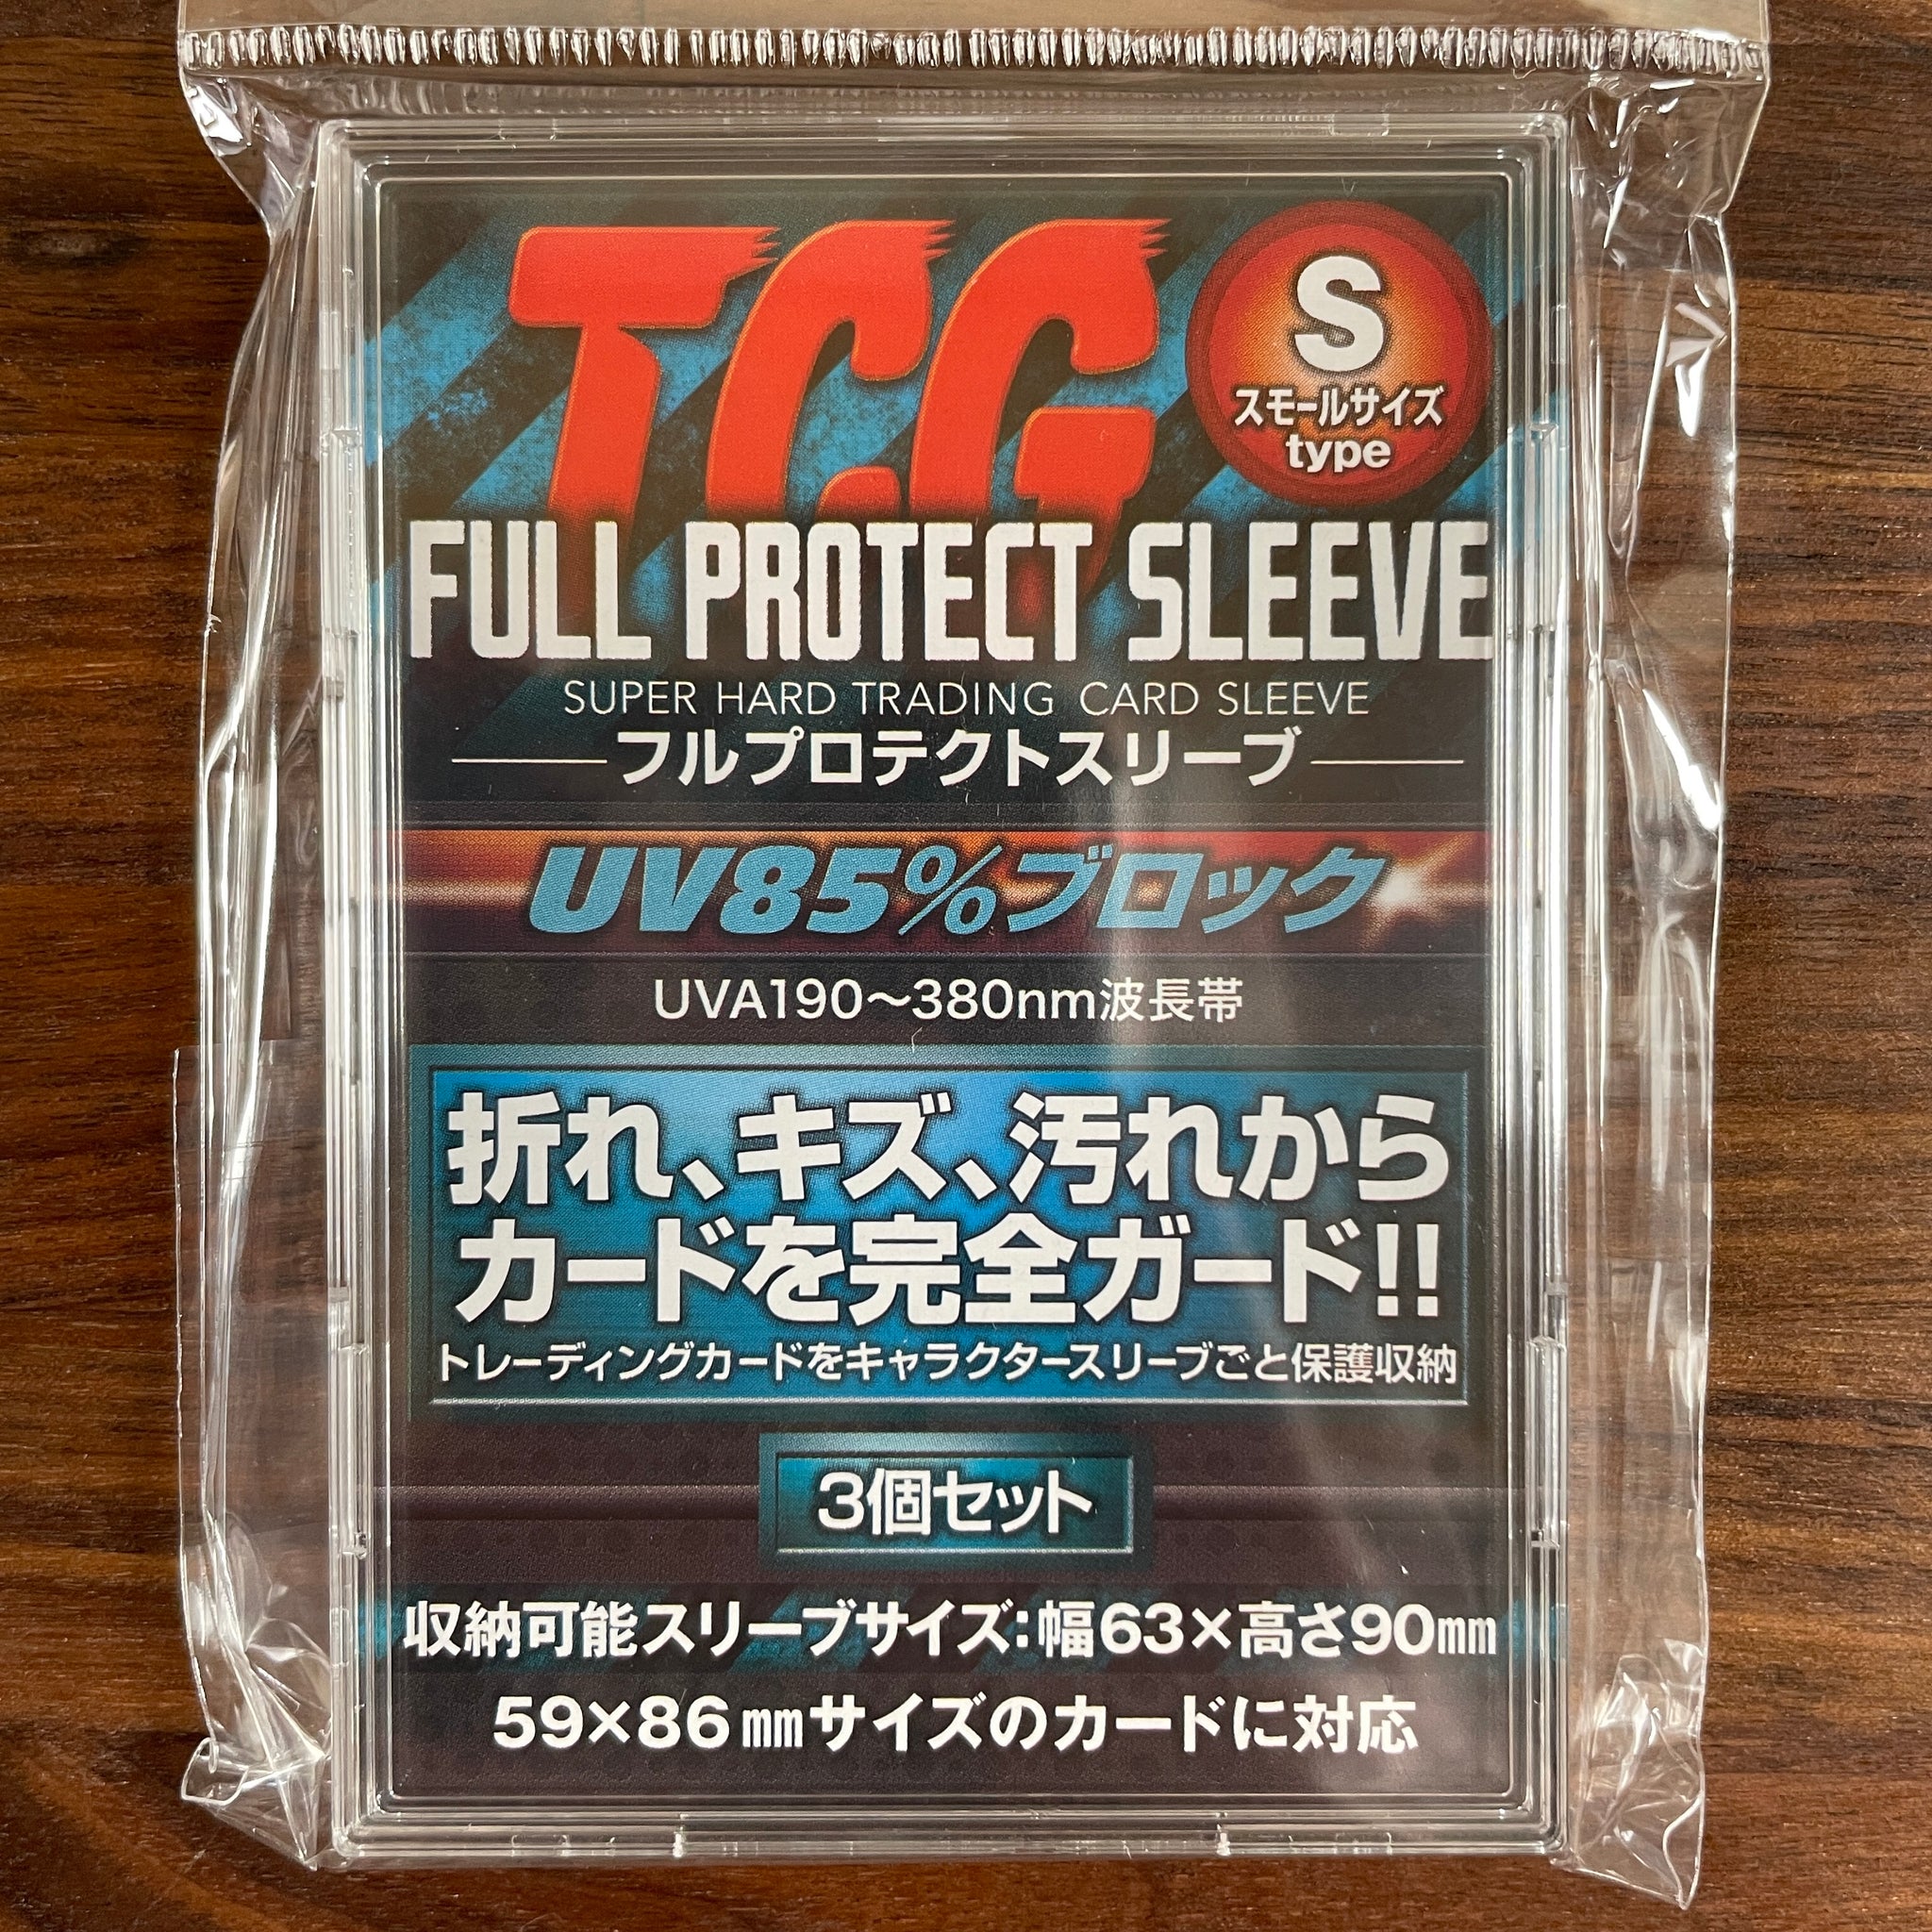 FULL PROTECT SLEEVE SUPER HARD TRADING CARD SLEEVE Small size type (se